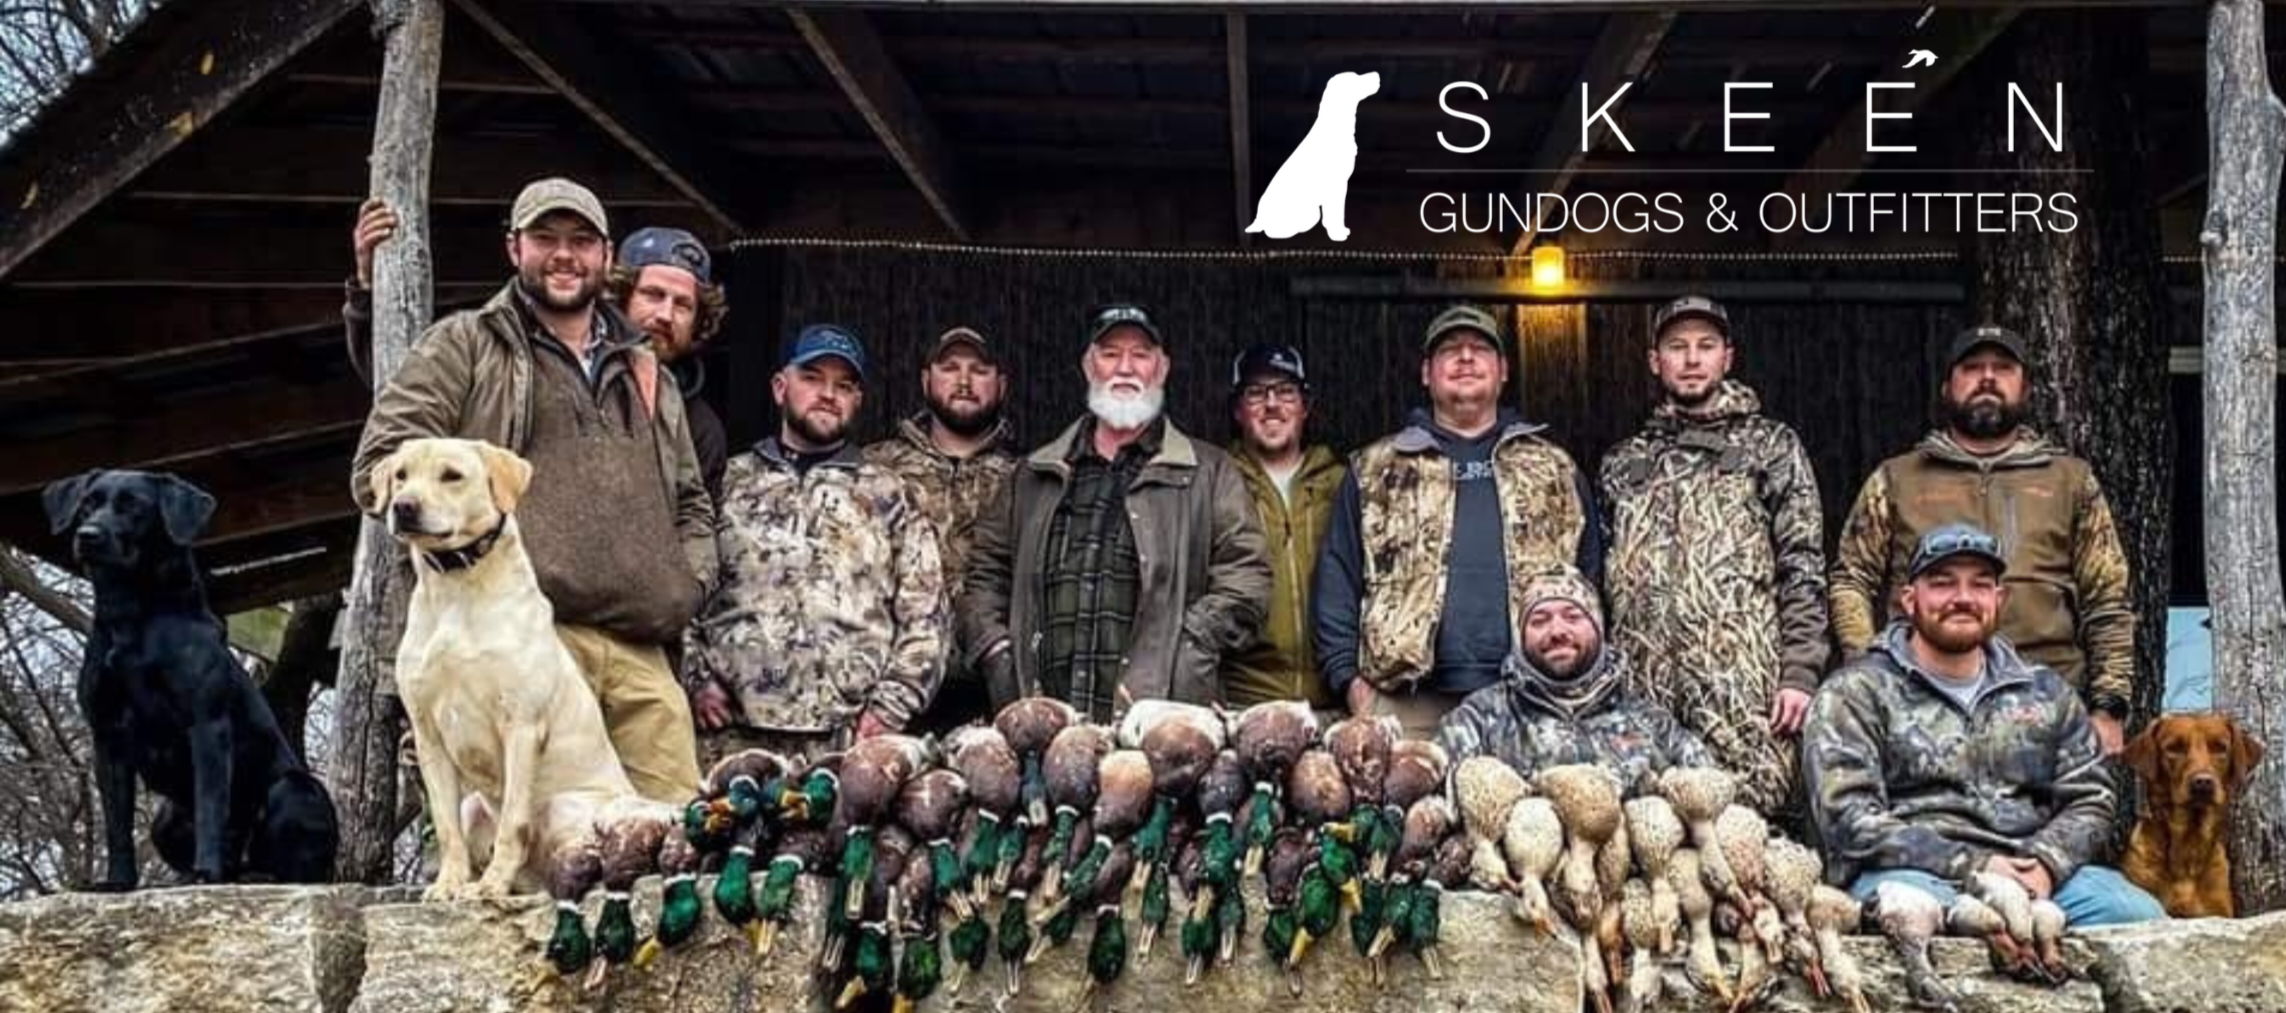 Skeen Gundogs and Outfitters